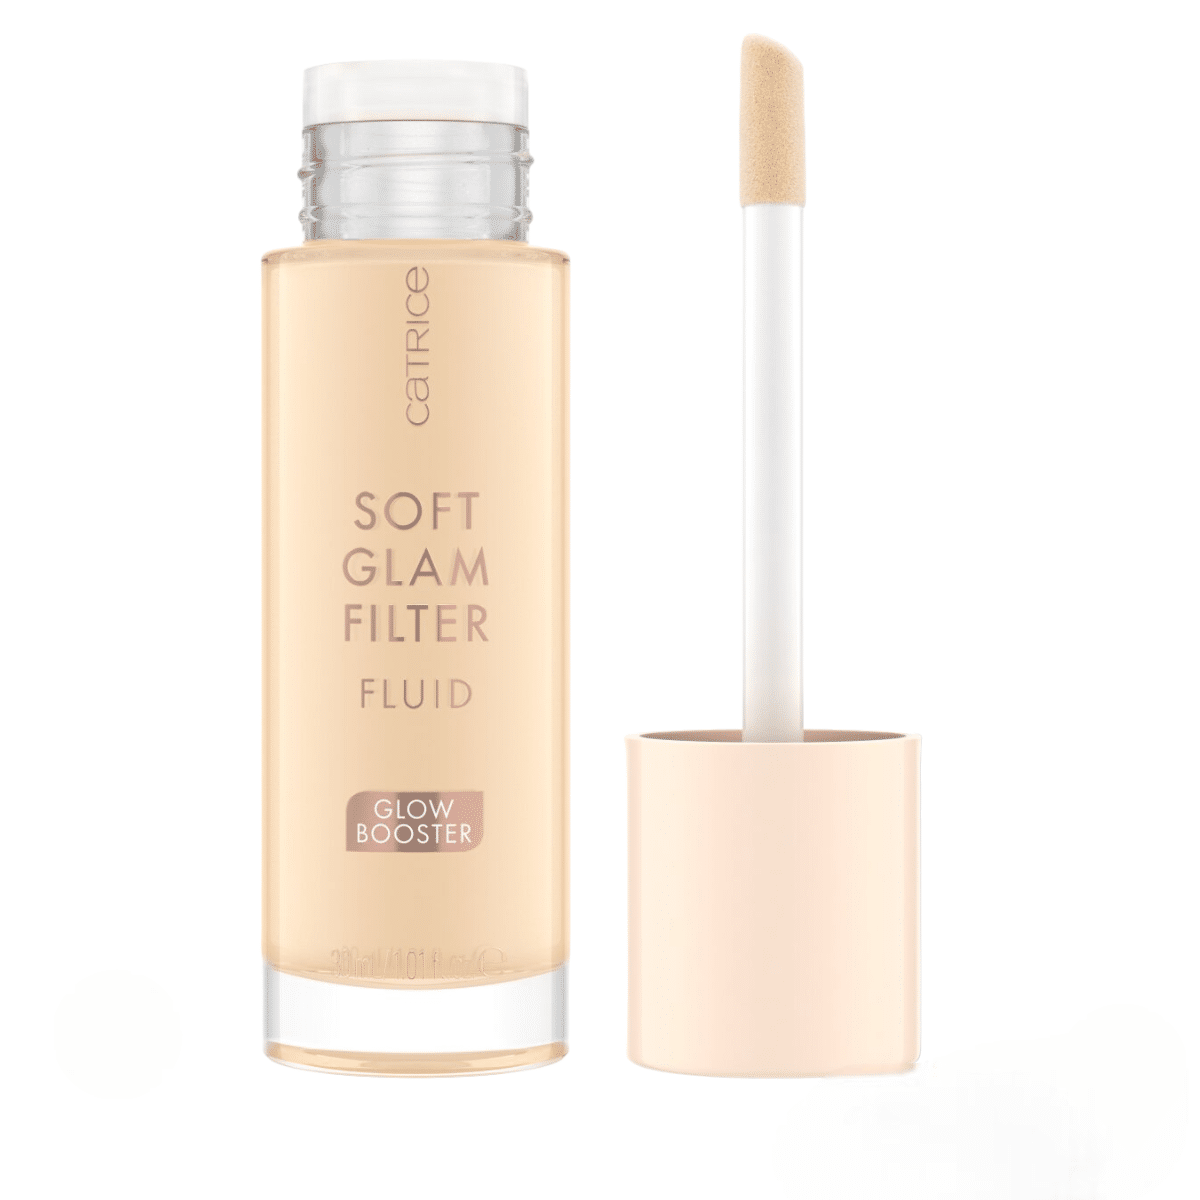 Catrice - Soft Glam Filter Fluid 002 30ml